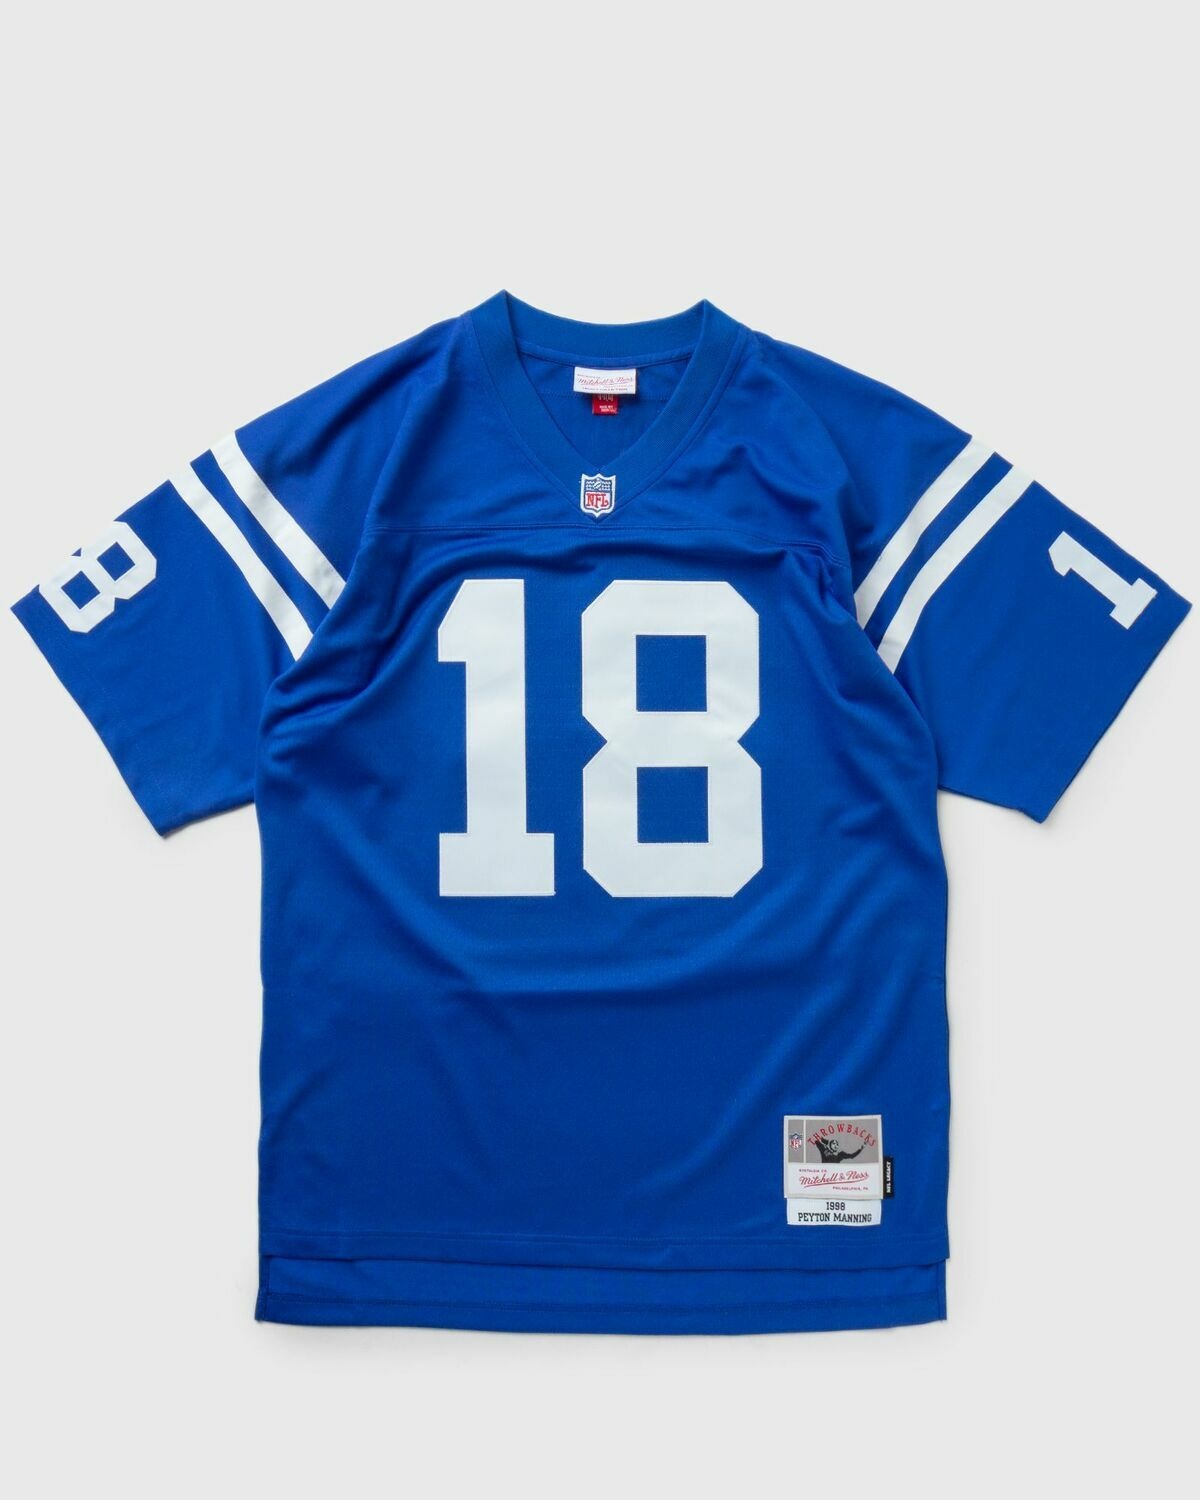 Mitchell & Ness Nfl Legacy Jersey Indianapolis Colts 1998 Peyton Manning #18 Blue - Mens - Jerseys